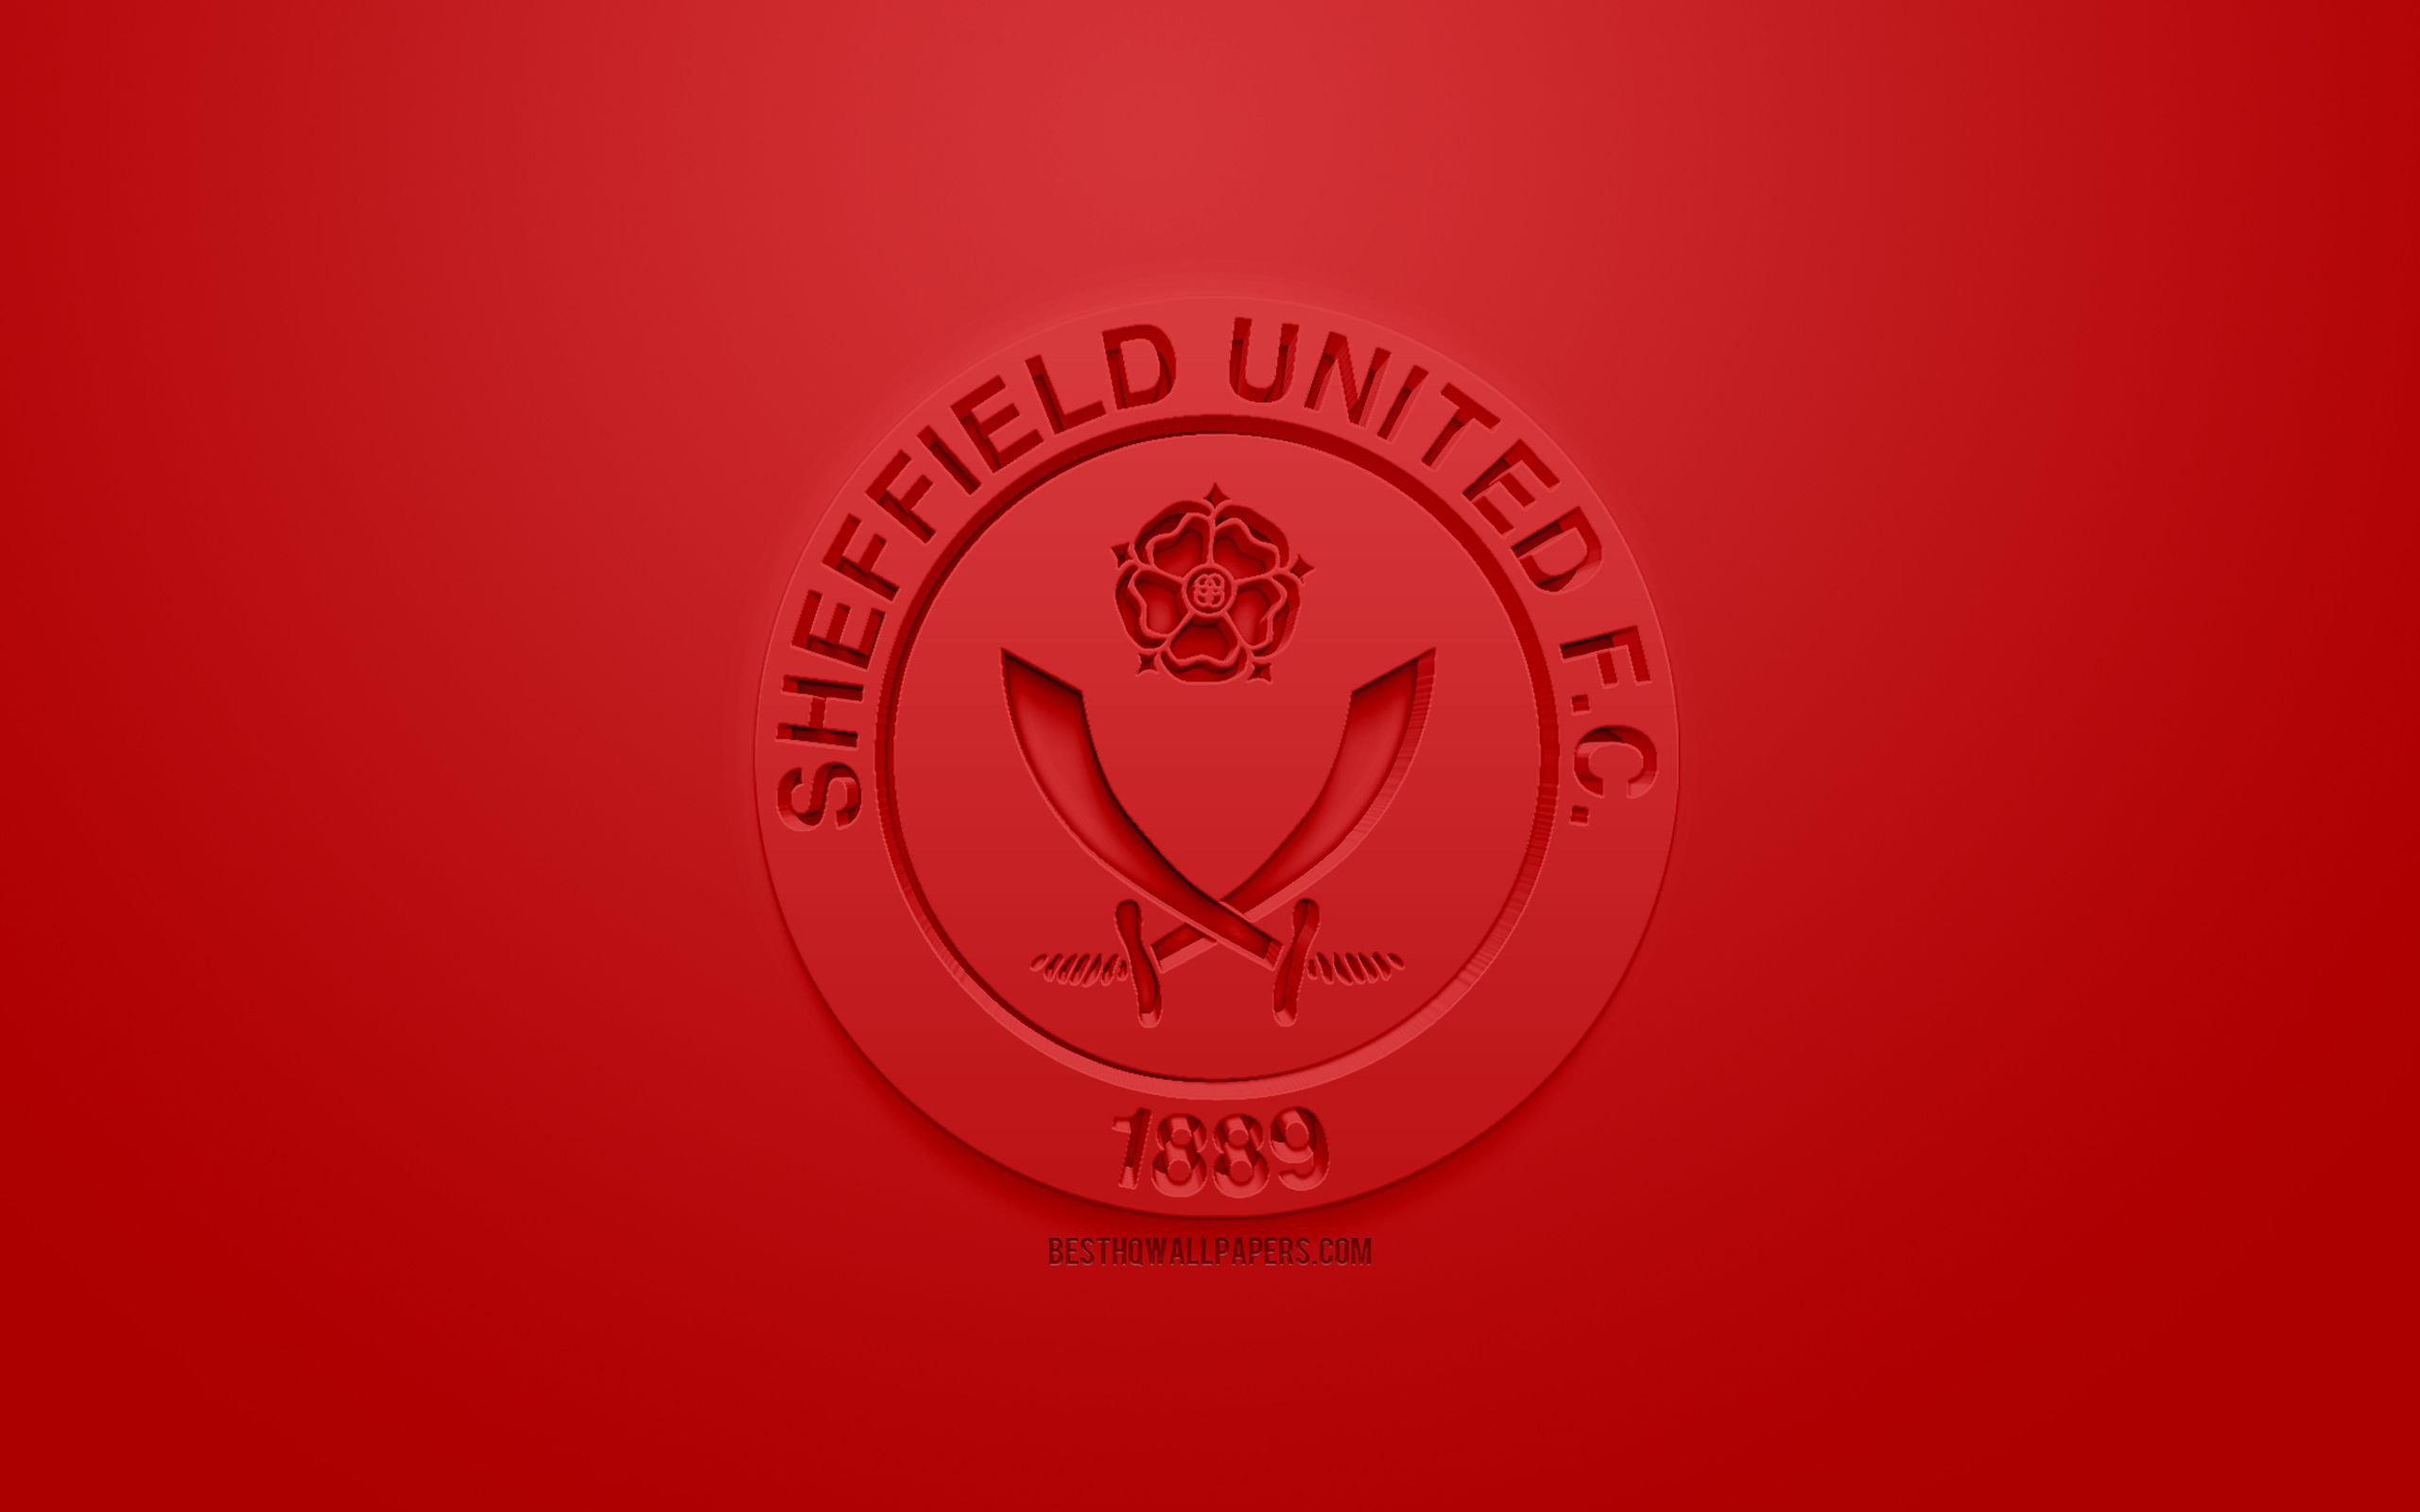 Download wallpaper Sheffield United FC, creative 3D logo, red